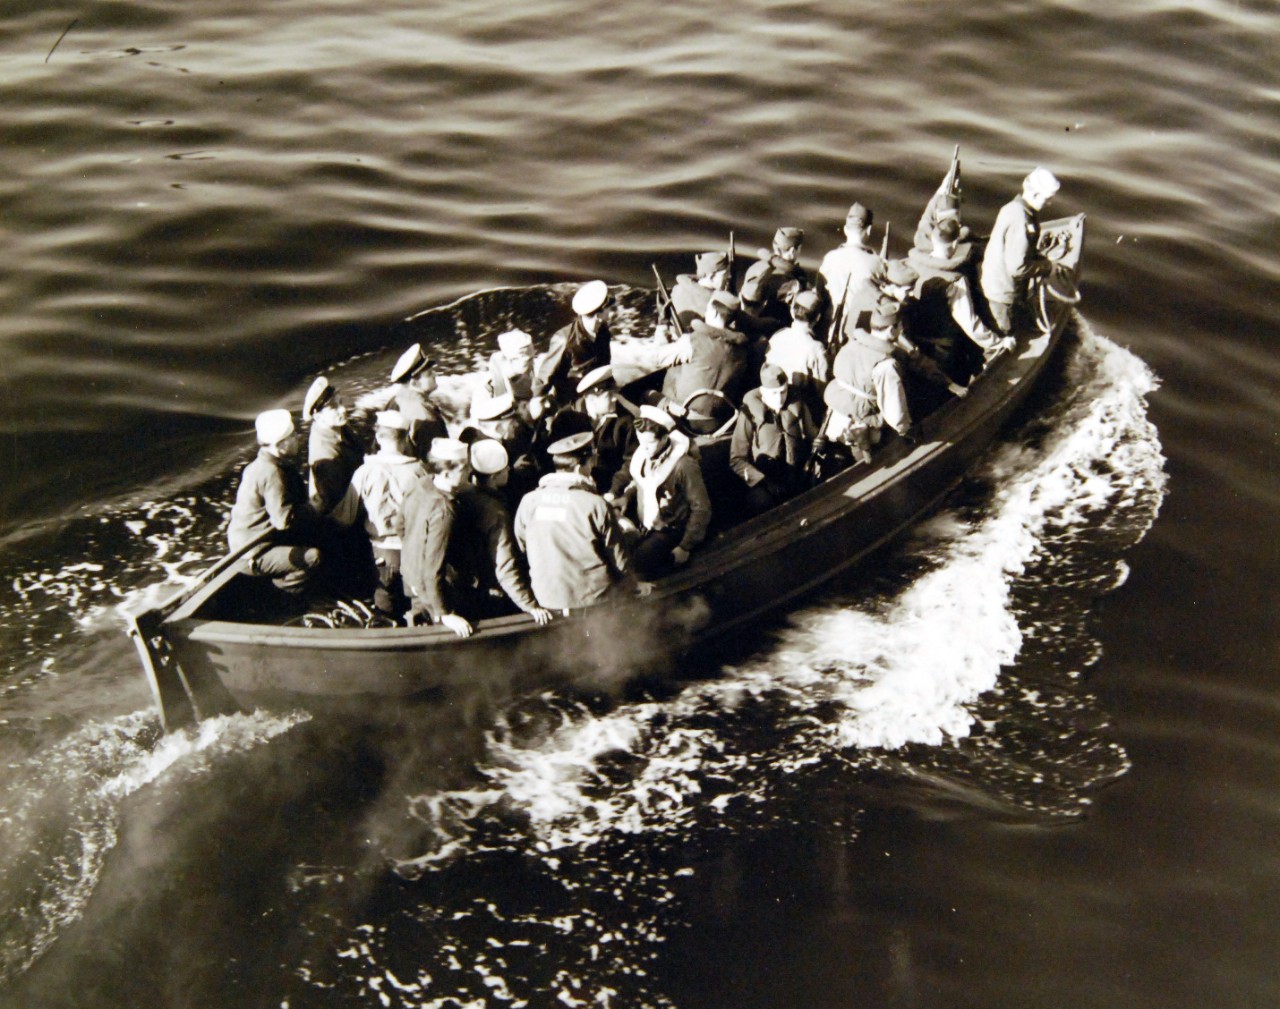 80-G-320307: Surrender of German U-boats, WWII.  Surrender of German U-boat, U-858, 700 miles off the New England Coast to two destroyer escorts, May 10, 1945.  Shown:  A boarding party from USS ATR-57 sets out for U-858.    Official U.S. Navy Photograph, now in the collections of the National Archives.  (2017/07/18).